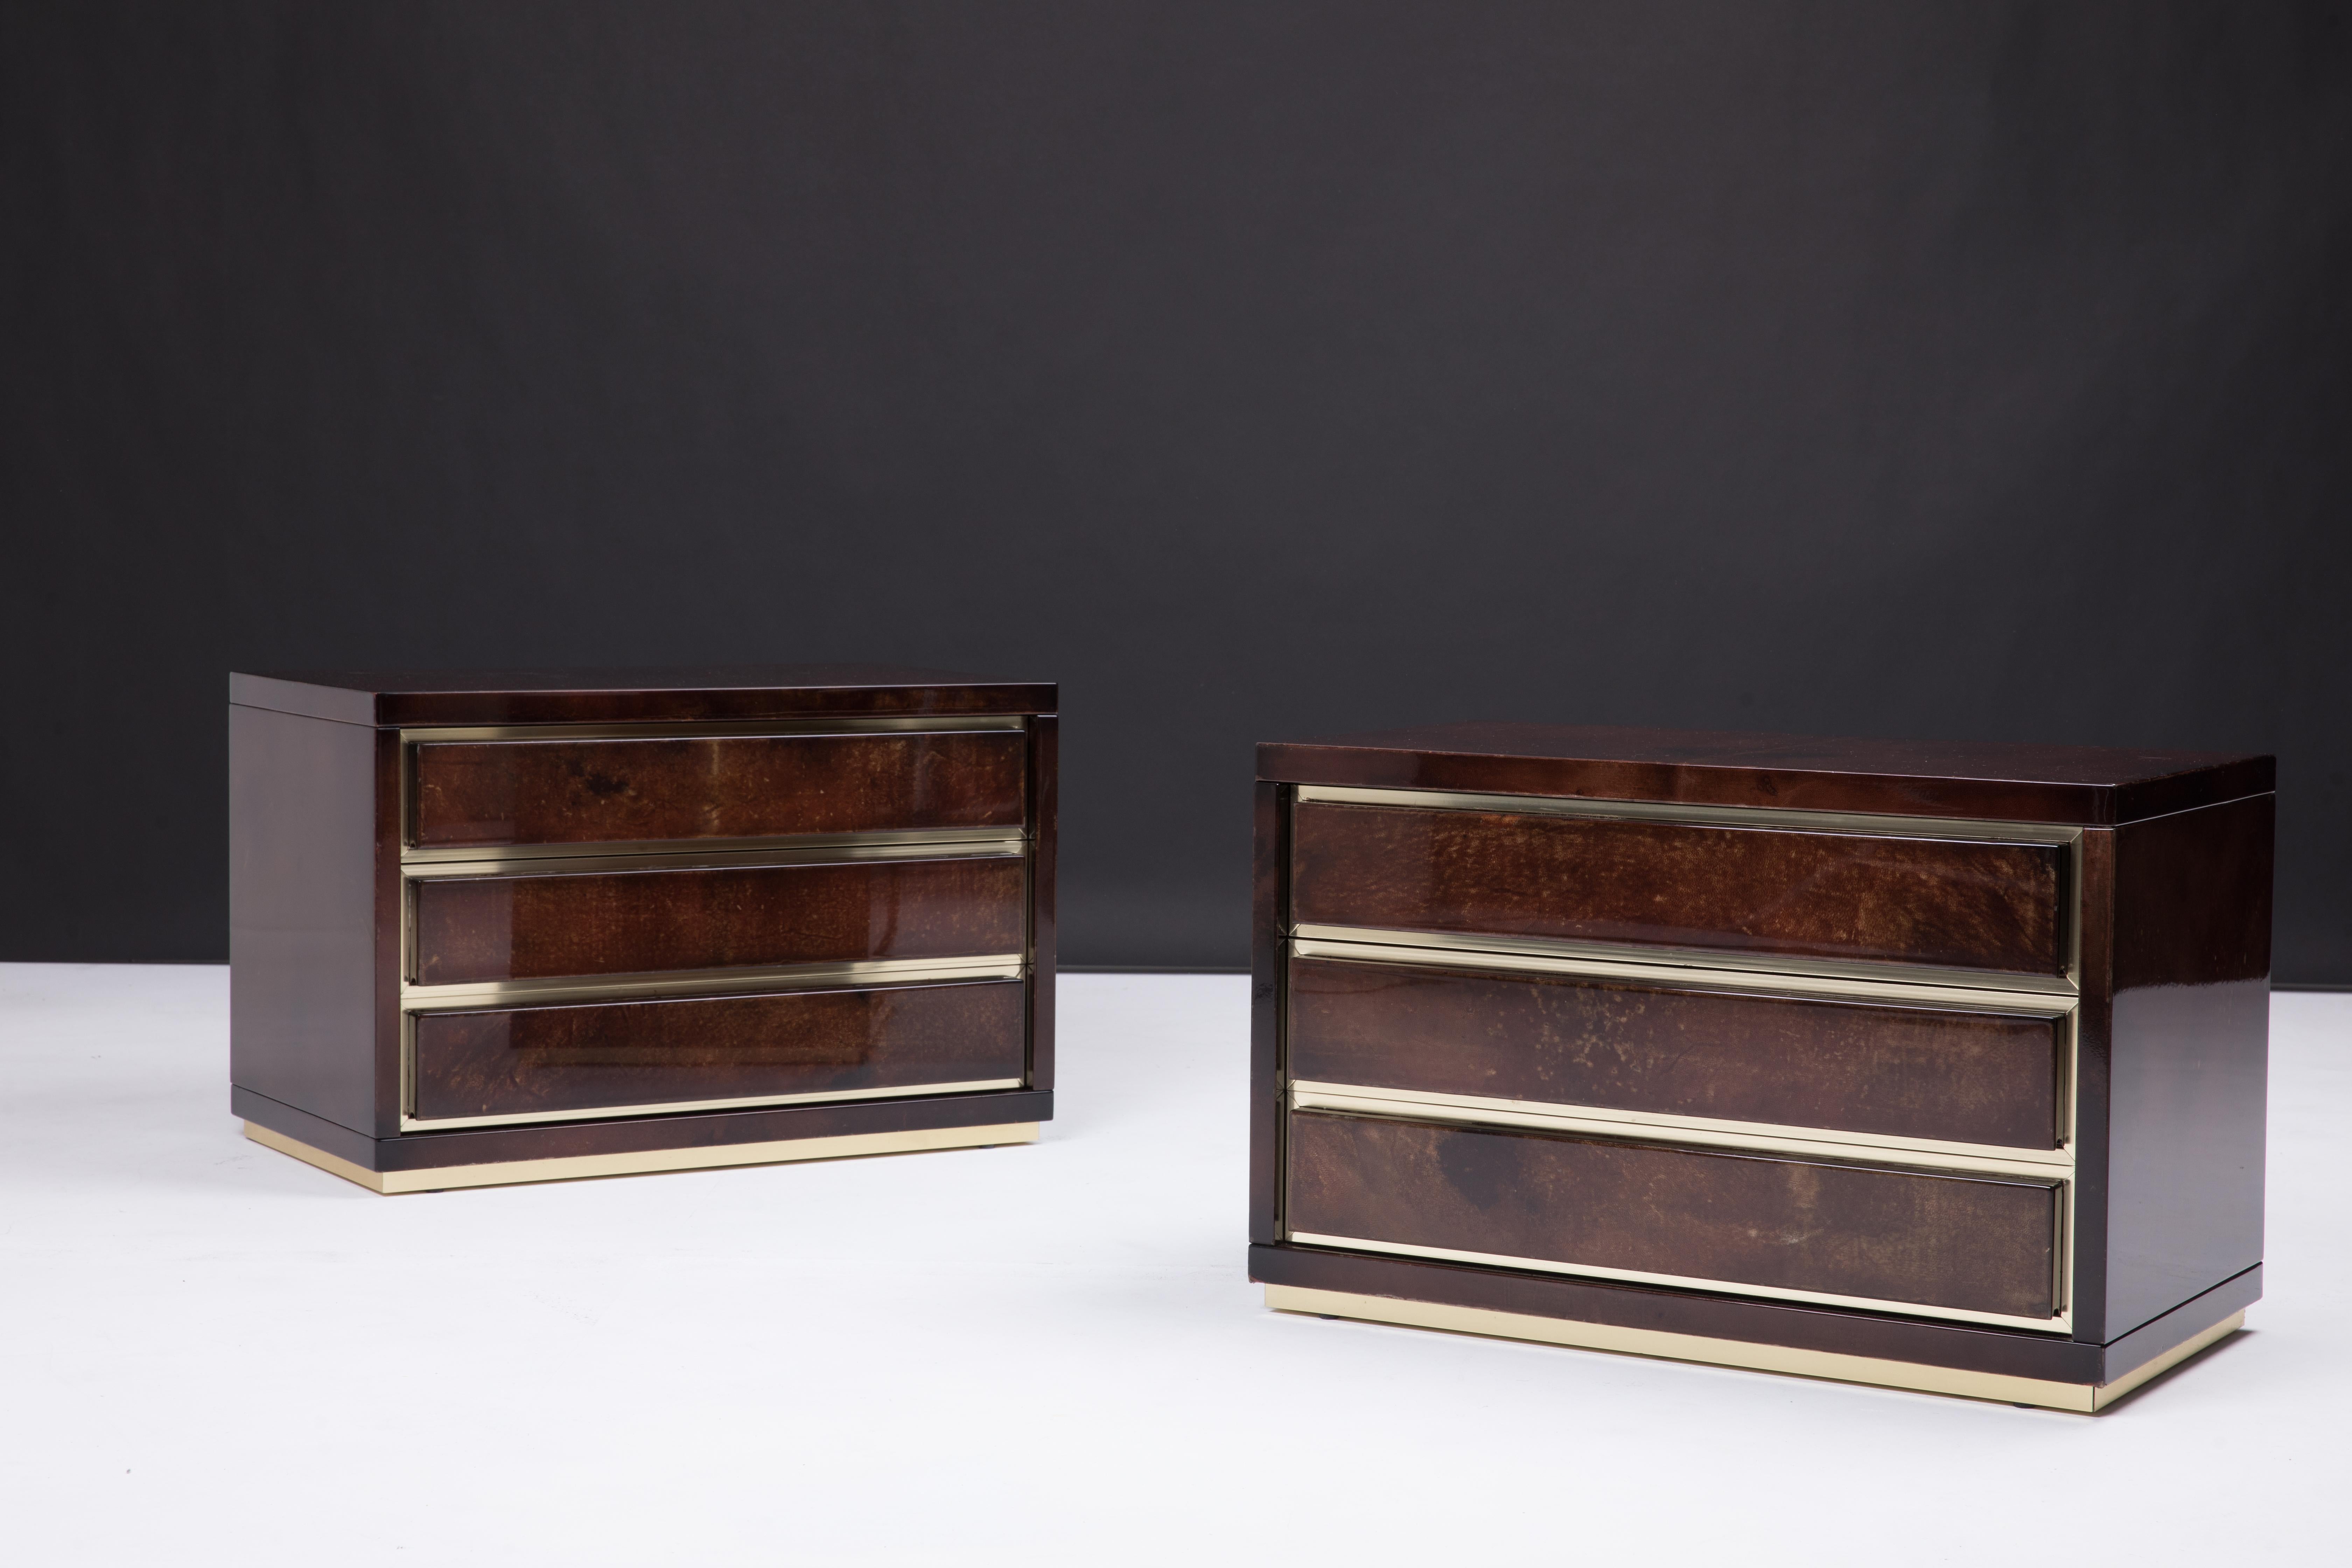 Italian lacquered goatskin nightstands or bedside with brass profiles manufactured by Saipol and designed by Aldo Tura, 1970s
Excelled restored conditions.